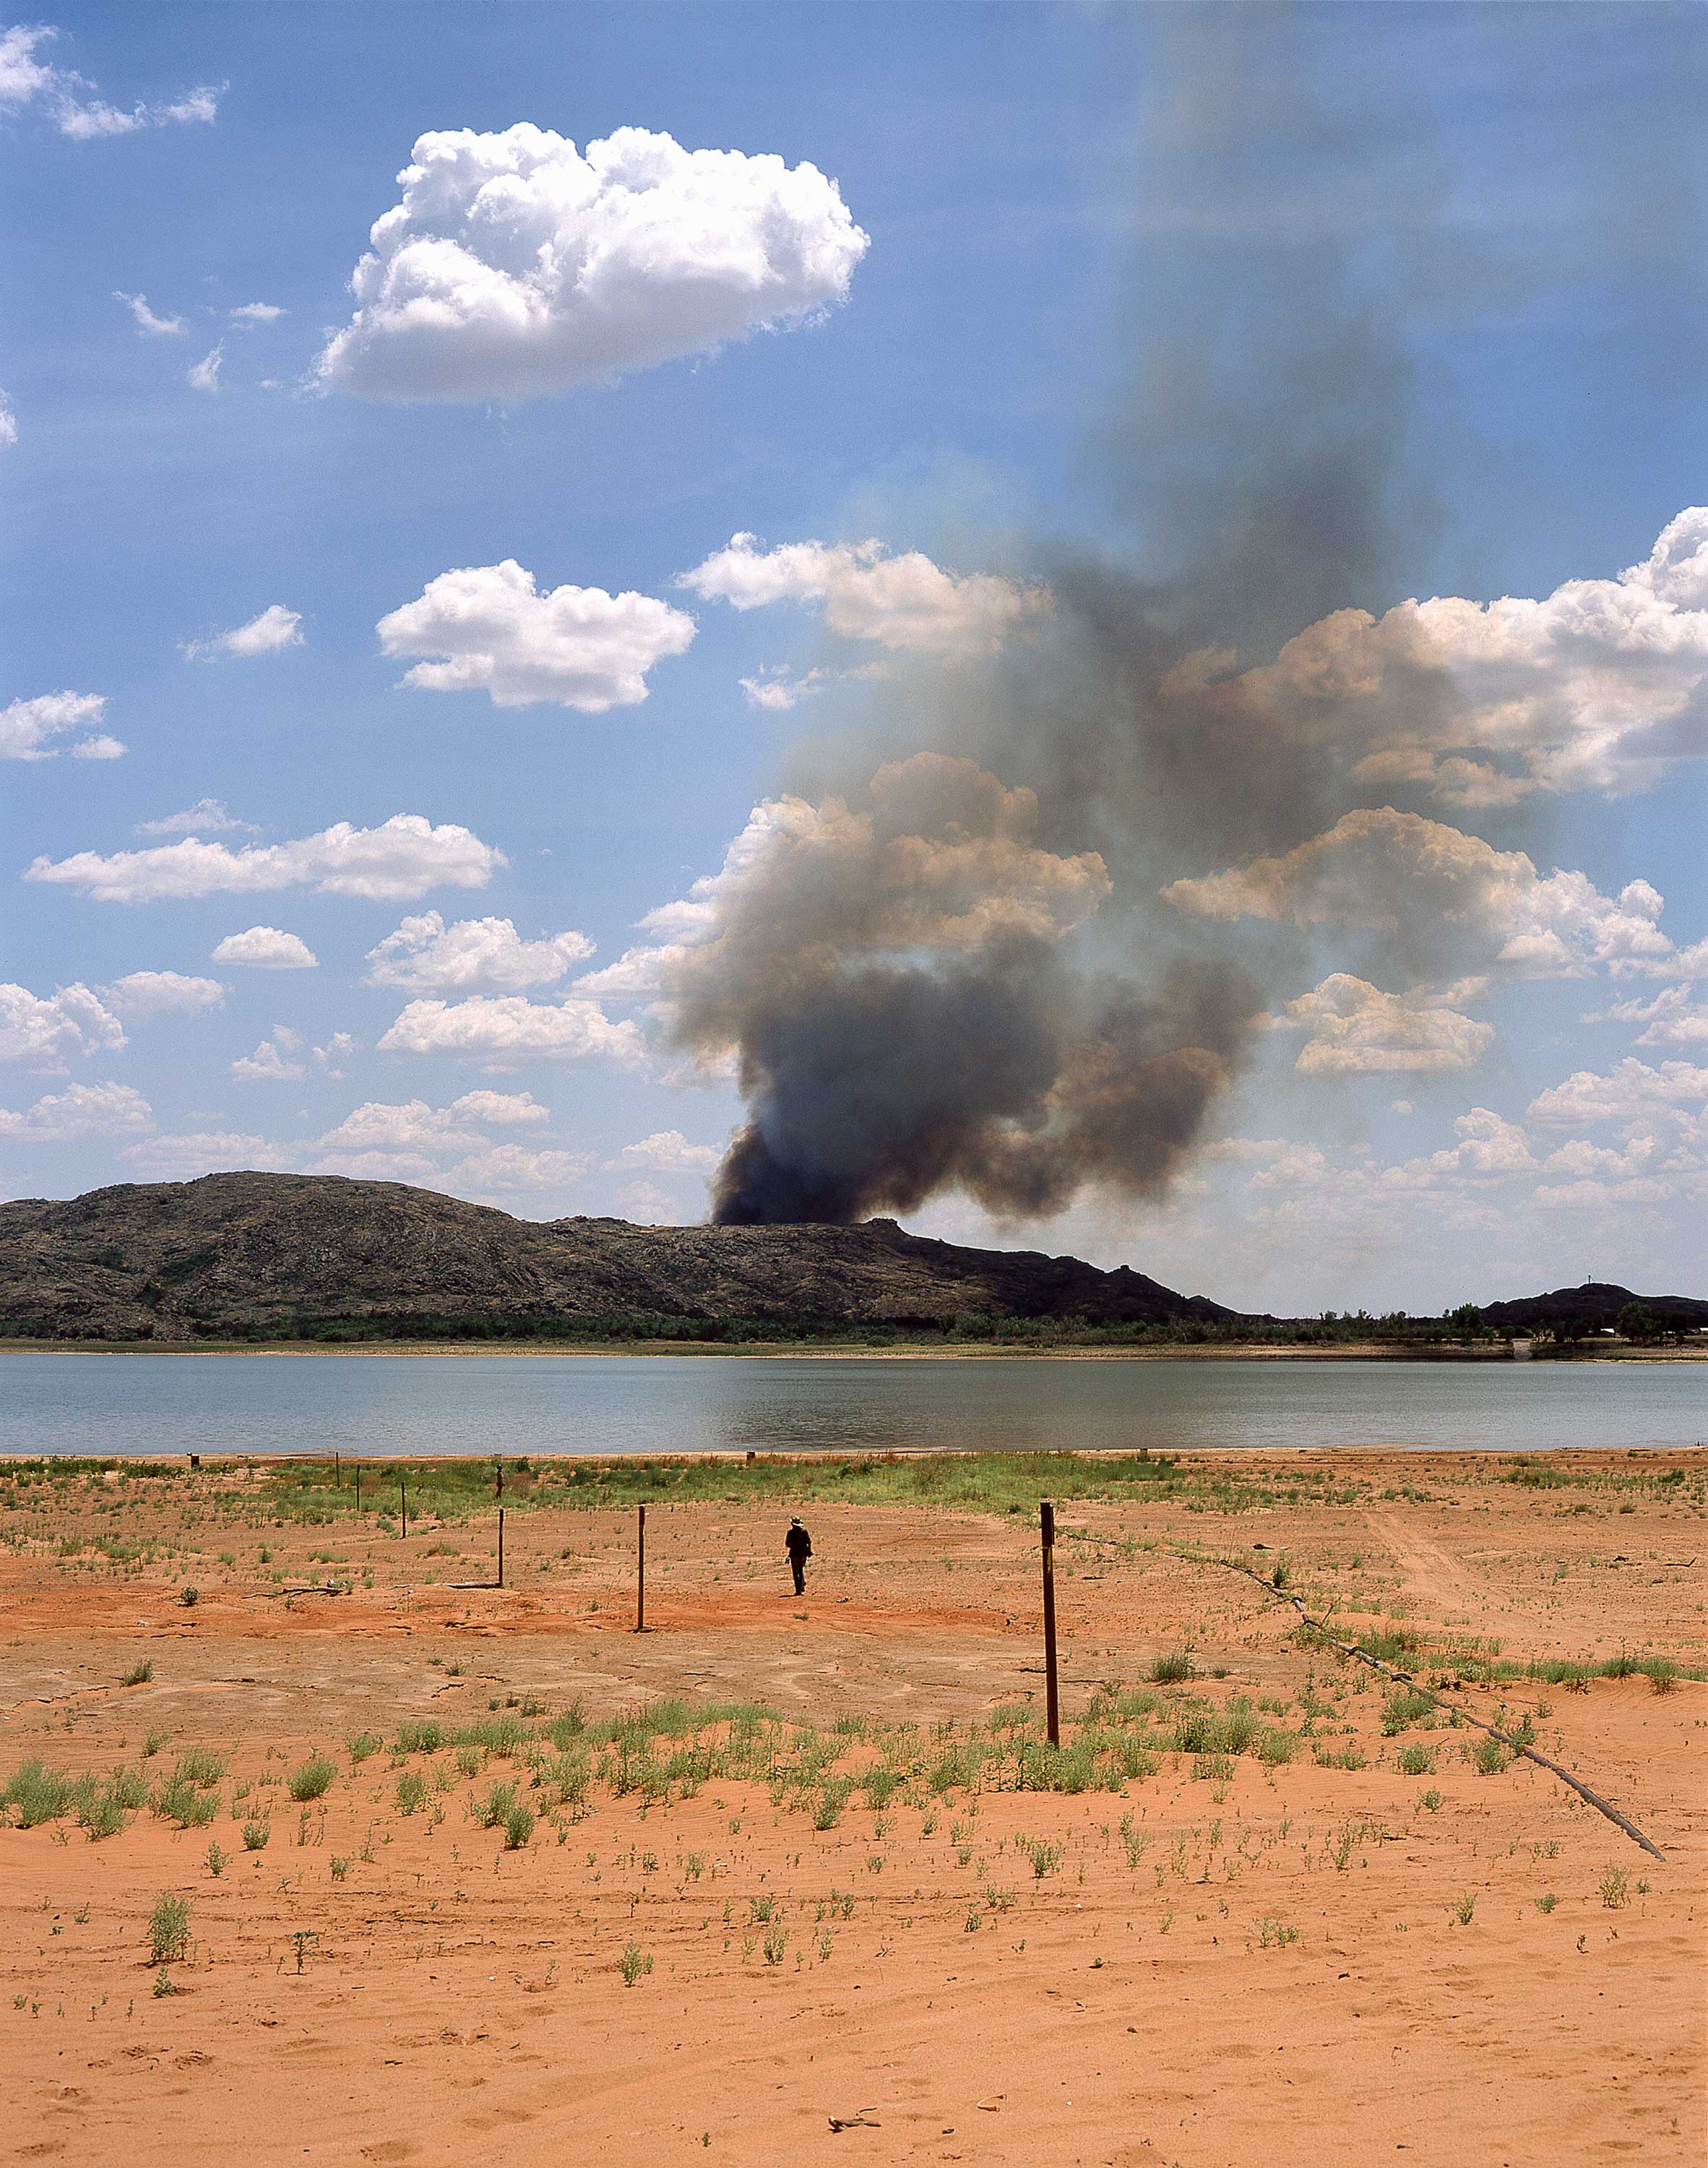 ANDREW-williams-drought-southwest-california-texas-fire-global-warming-photography-contemporary-landscape-documentary_21